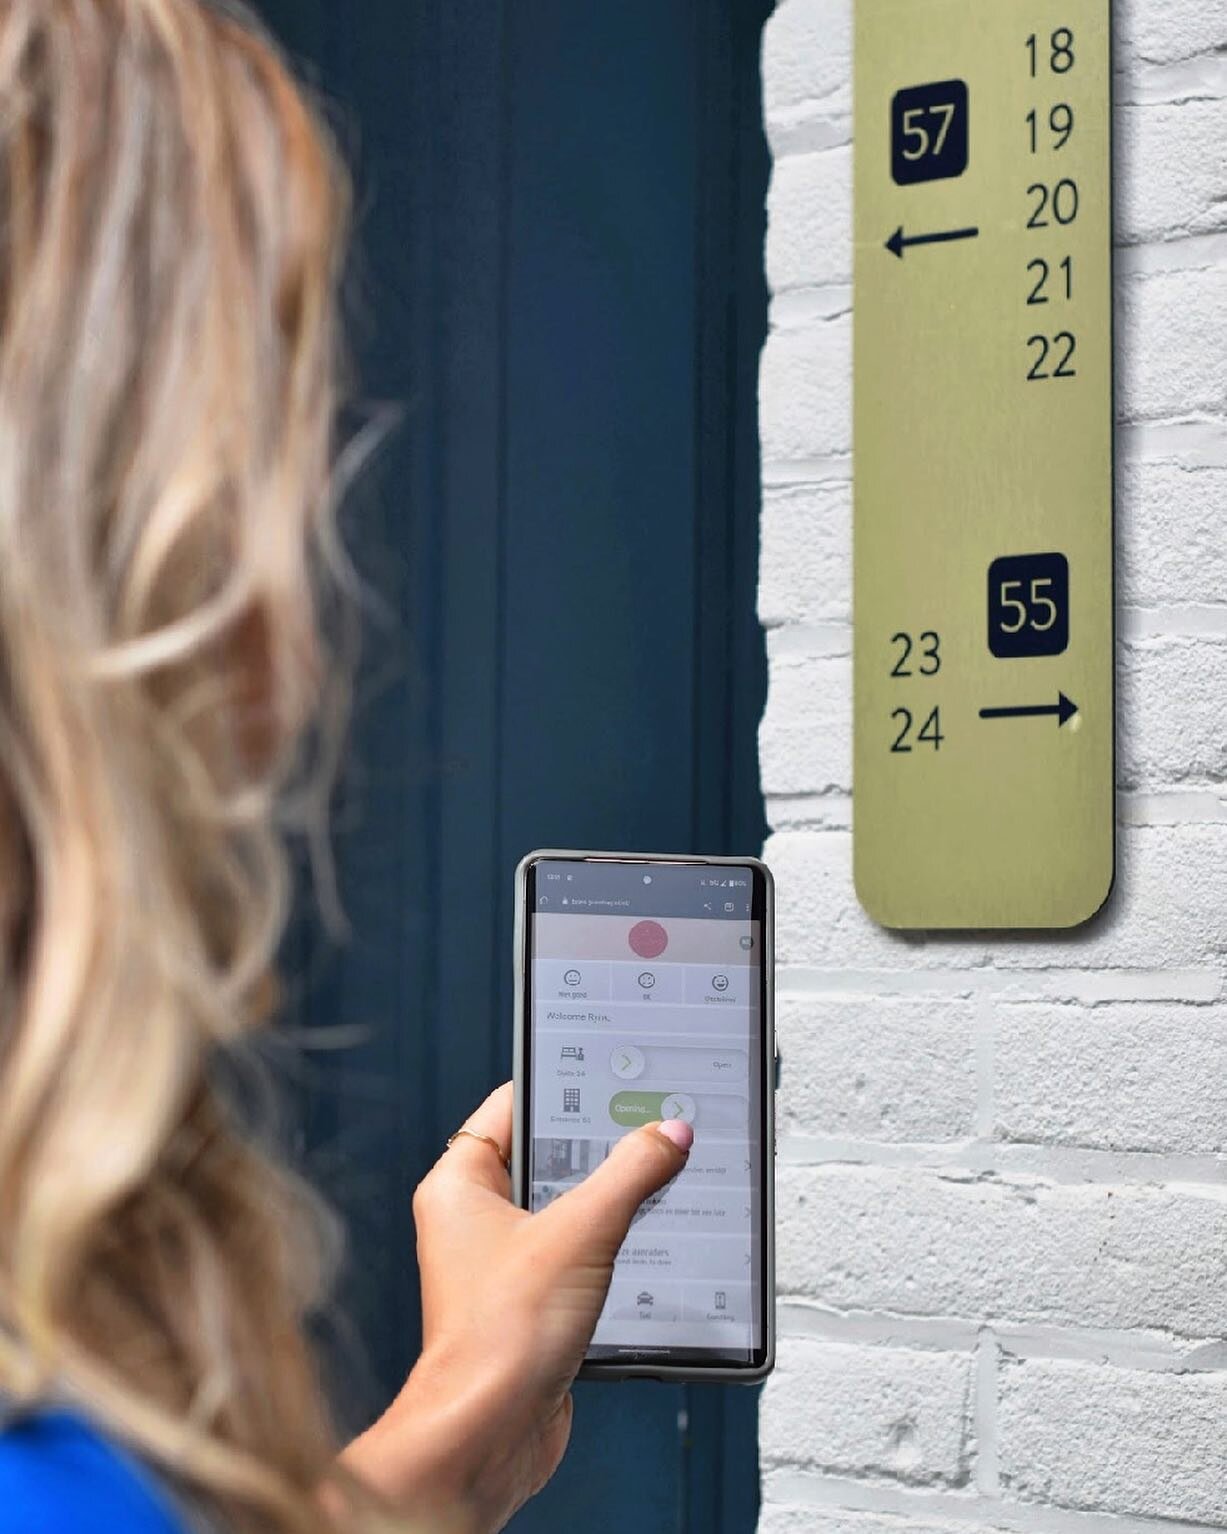 What makes us unique? Our digital check-in and check-out system is giving you complete flexibility during your stay with us!👌🏼

#key #easy #noqueue #flexibel #flexibility #digital #unique #stay #staywithus #thehague #denhaag